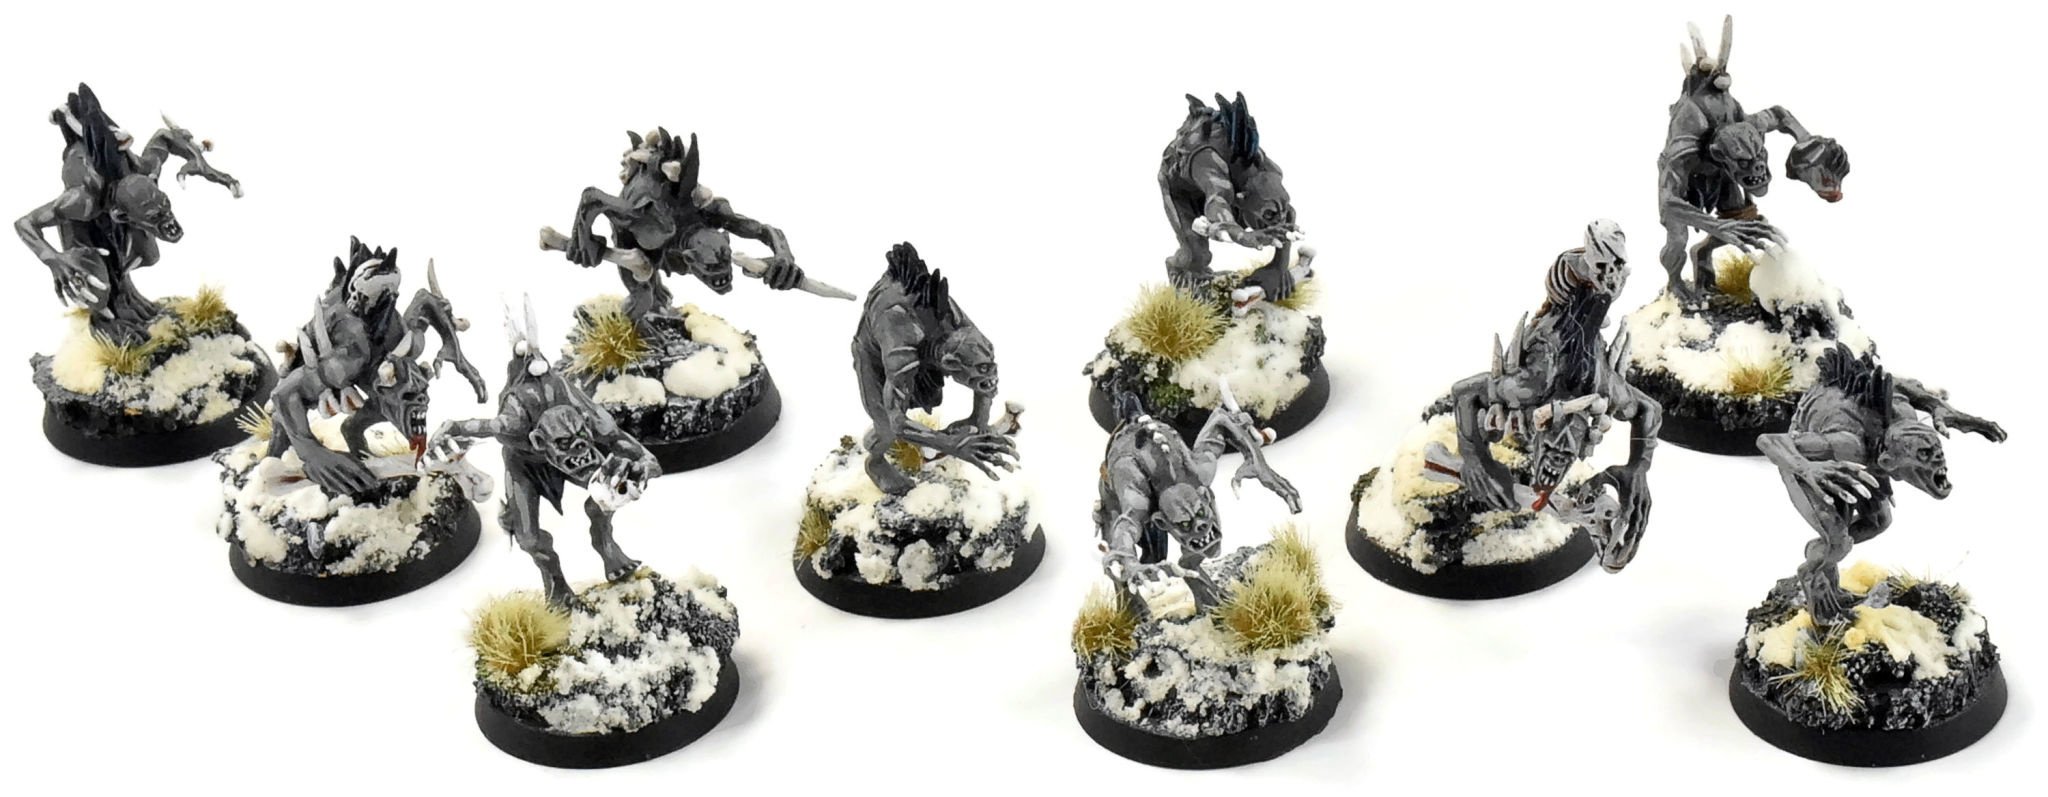 FLESH-EATER COURTS 10 Crypt Ghouls #1 Sigmar